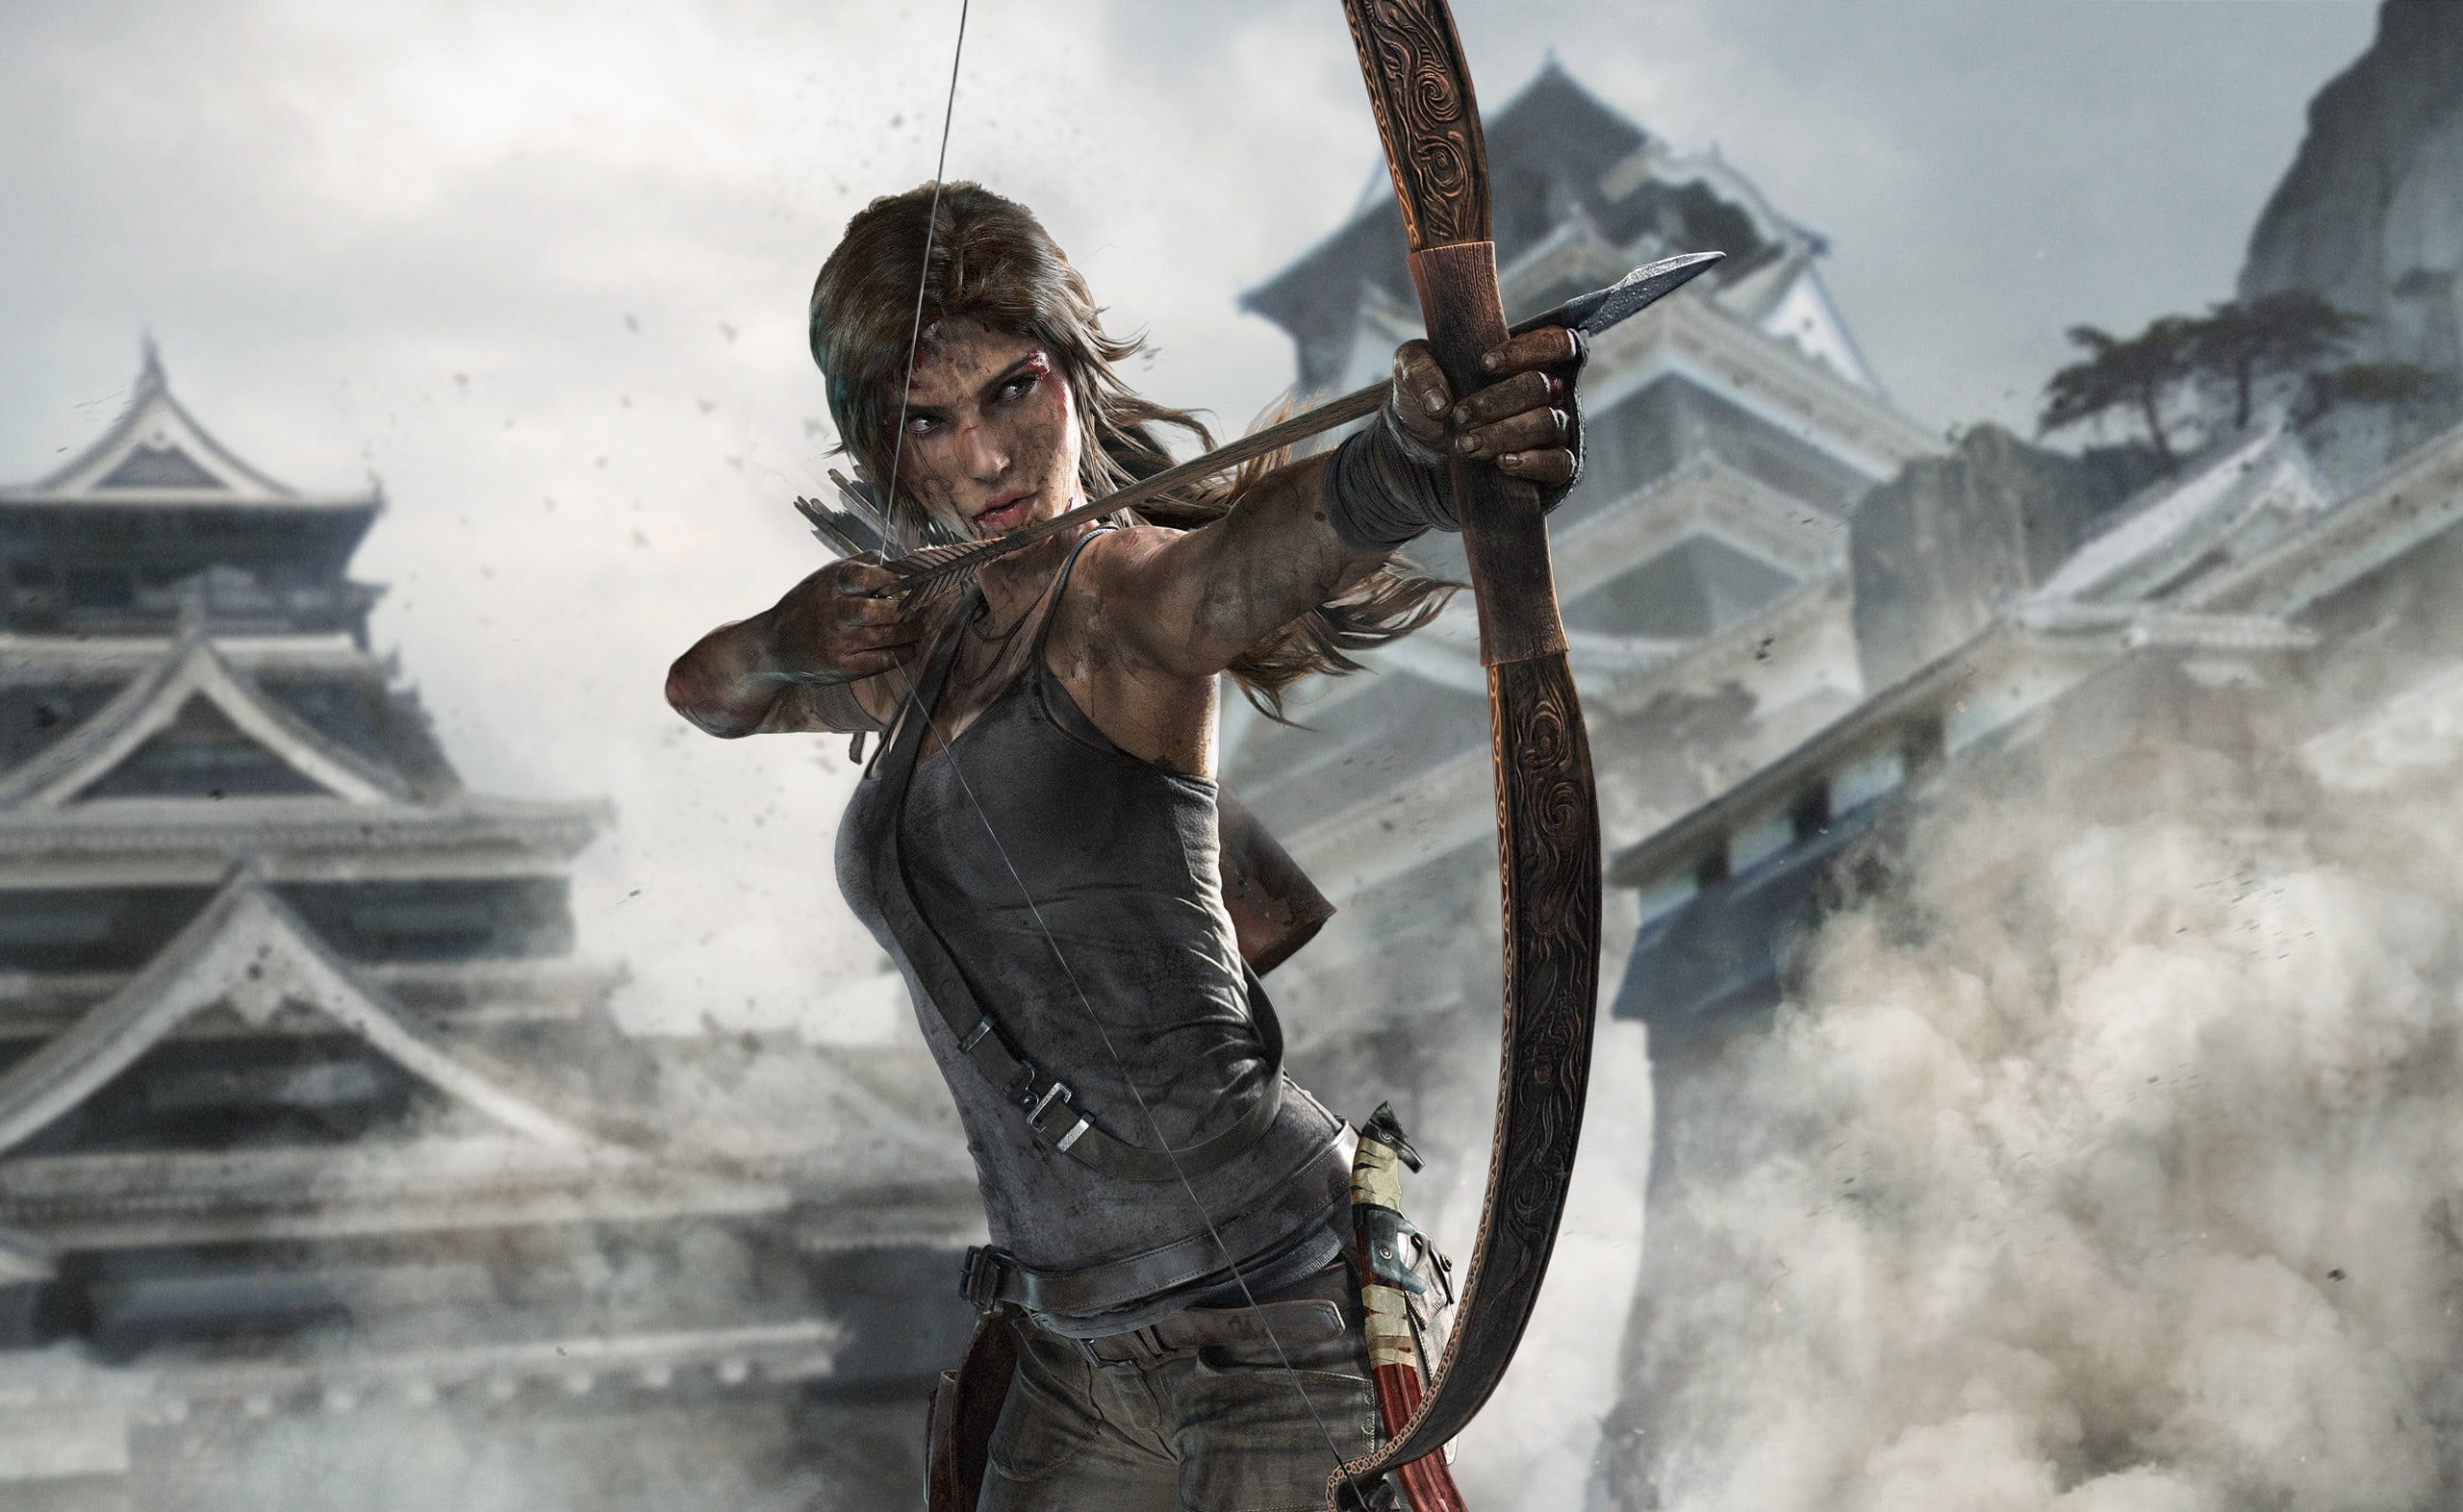 tomb raider wallpaper 1920x1080,action adventure game,compound bow,bow and arrow,pc game,arrow